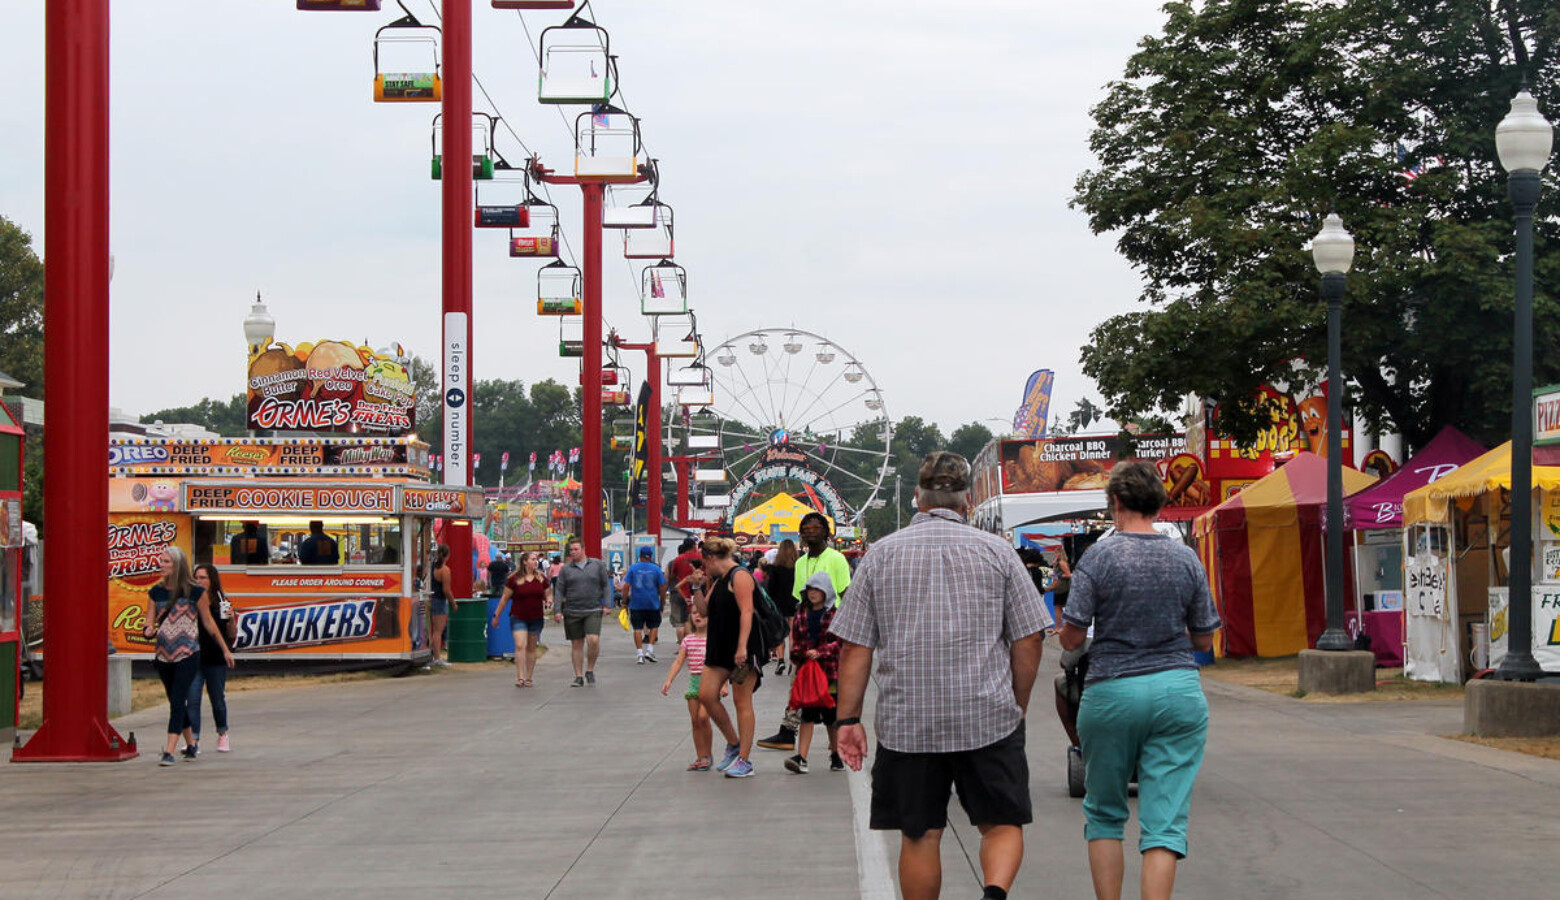 2020 Indiana State Fair Canceled Due To COVID19 Concerns Indiana